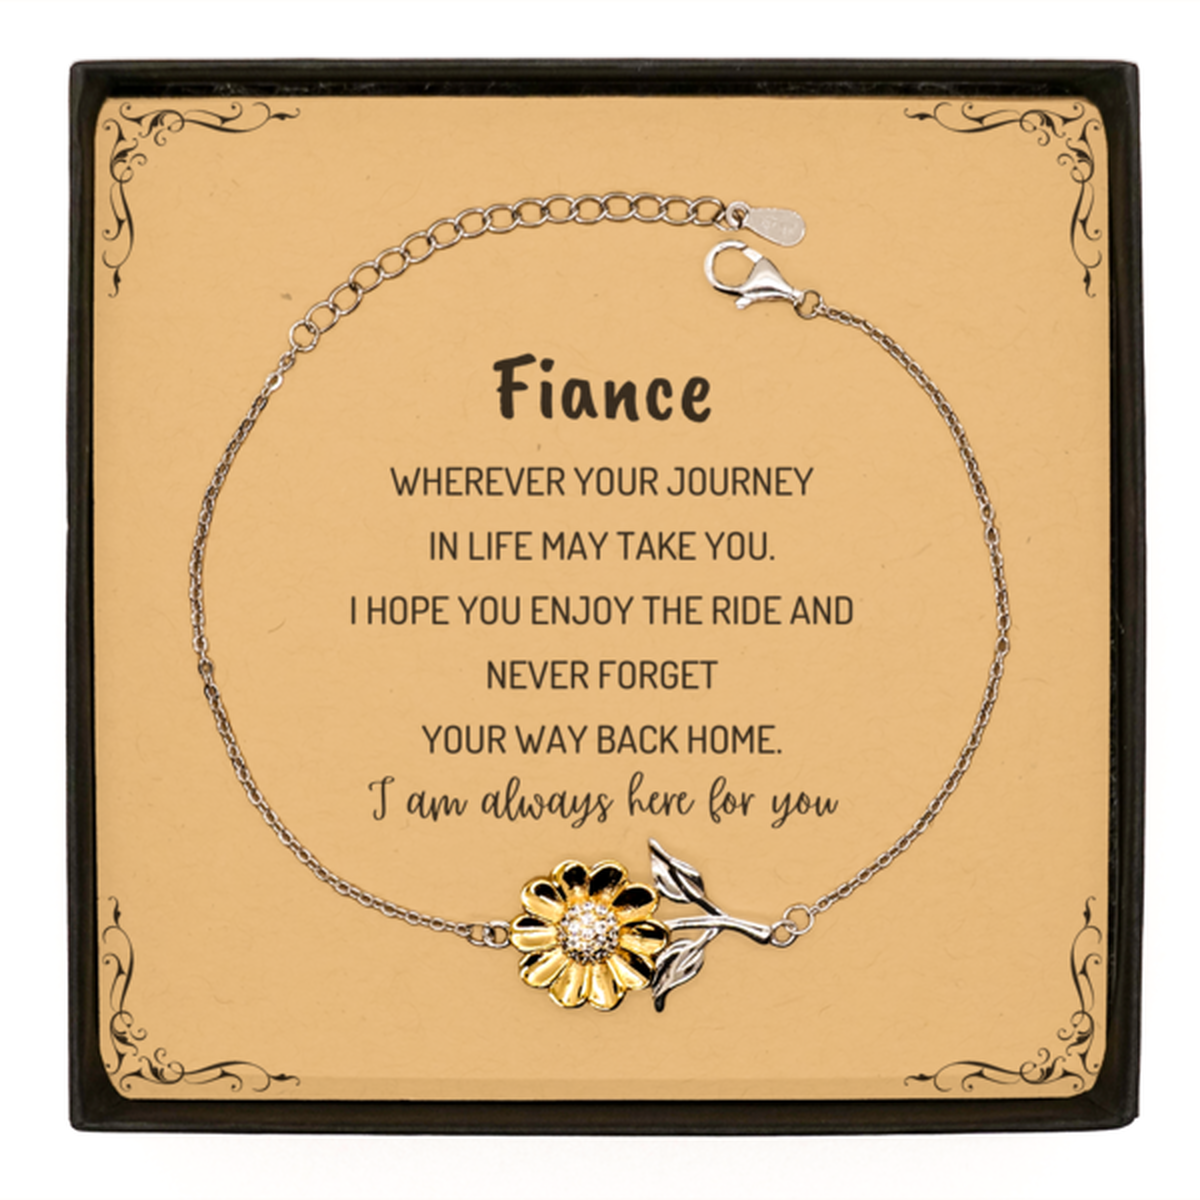 Fiance wherever your journey in life may take you, I am always here for you Fiance Sunflower Bracelet, Awesome Christmas Gifts For Fiance Message Card, Fiance Birthday Gifts for Men Women Family Loved One